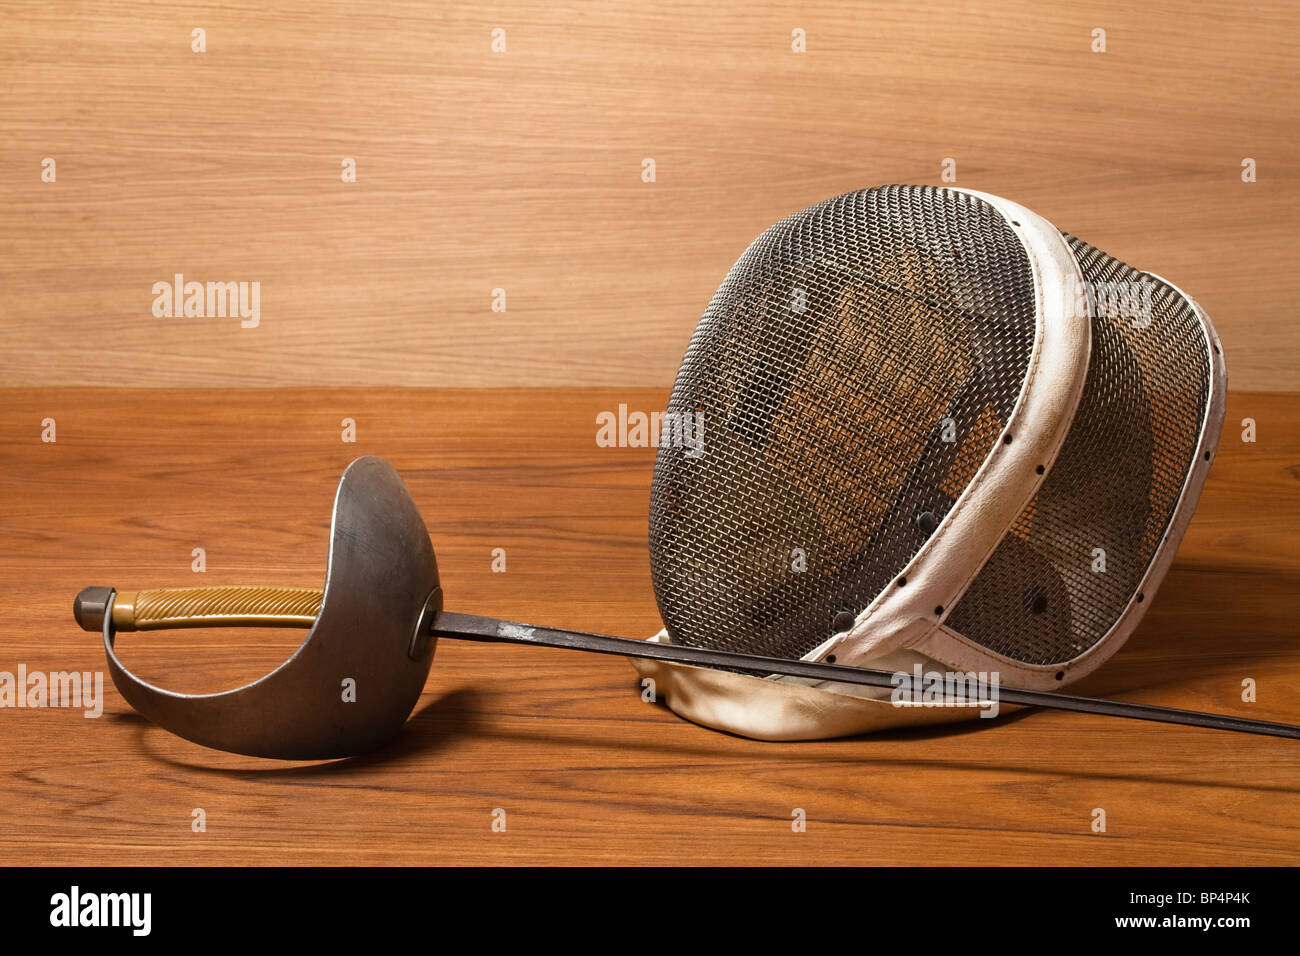 fencing mask and sword Stock Photo